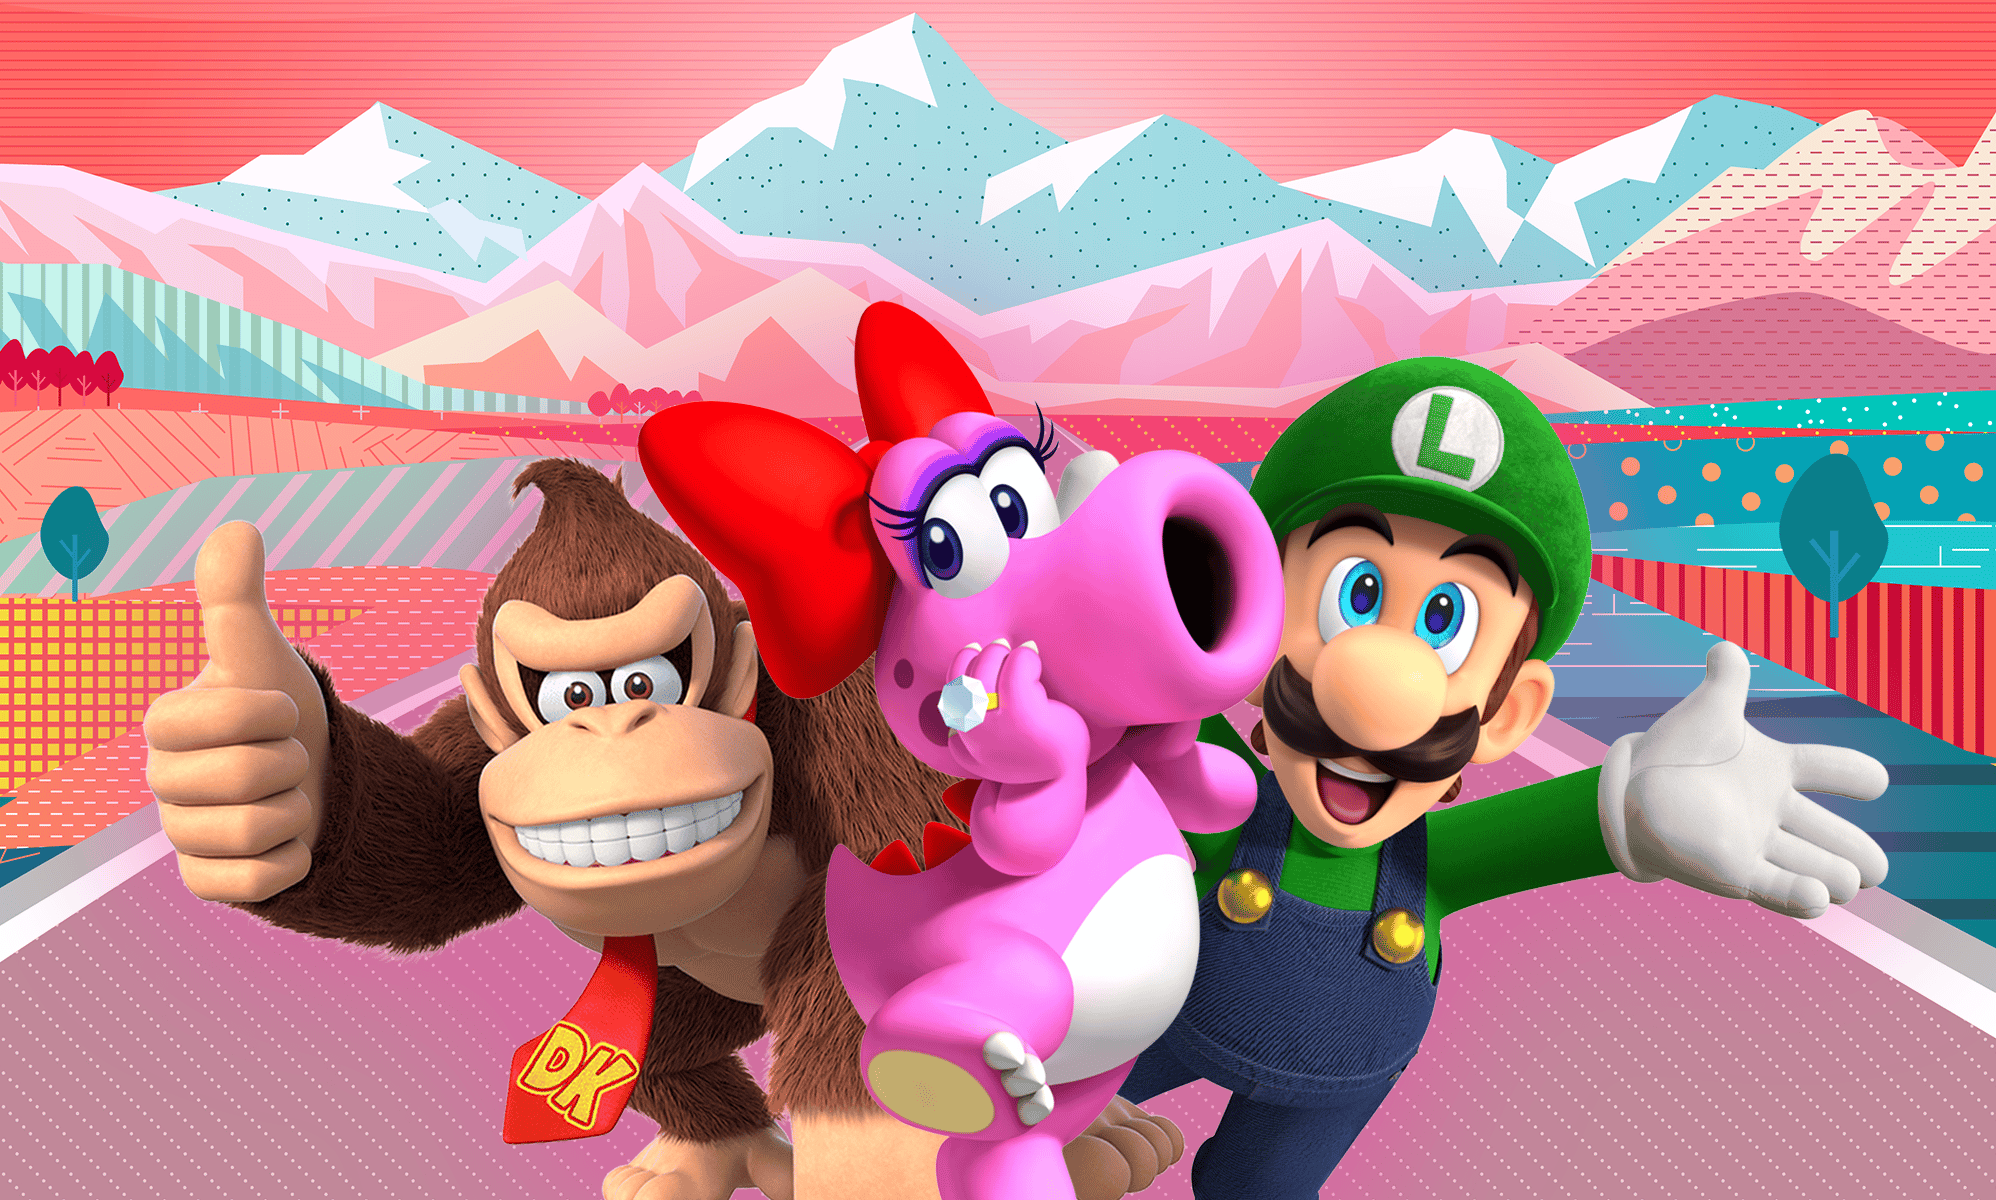 Watch today's Nintendo Direct: Mario vs. Donkey Kong, Paper Mario, Princess  Peach Showtime, much more